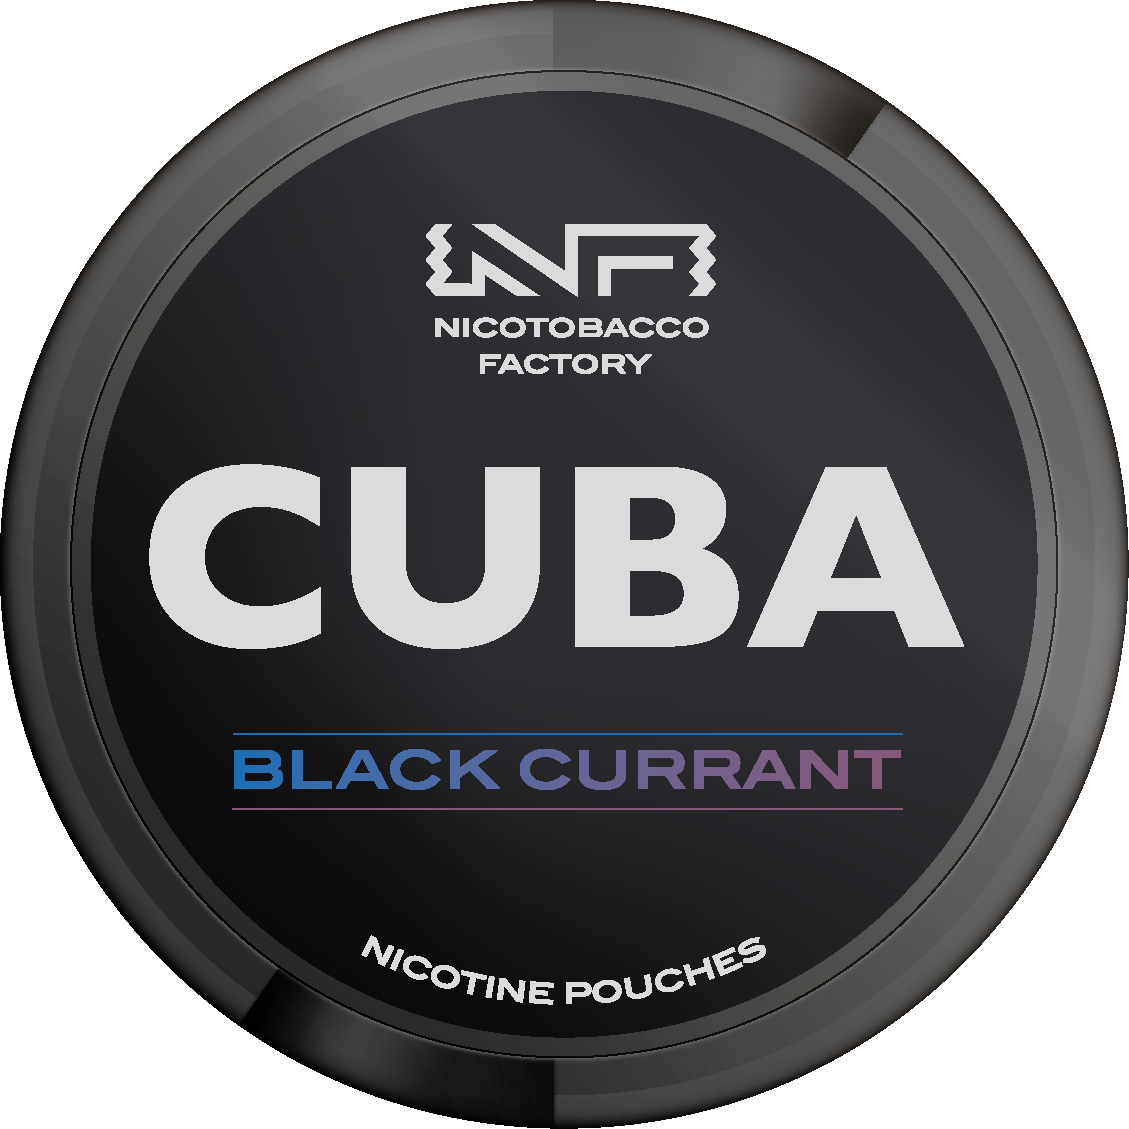 Black Blackcurrant Nicotine Pouches By Cuba